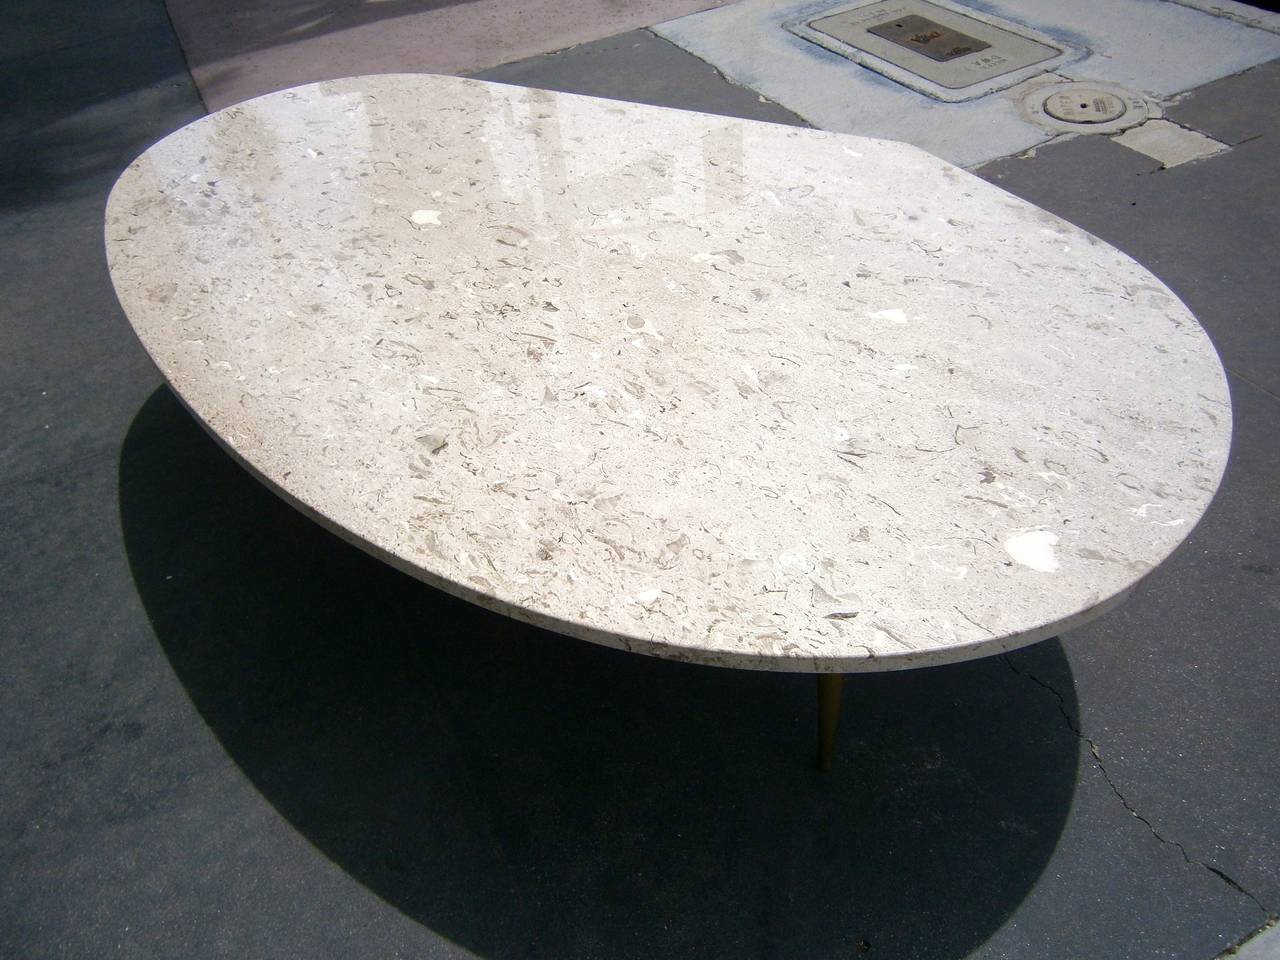 Mid-20th Century Kidney Shaped Marble Coffee Table With Brass-Plated Legs.  C. 1960